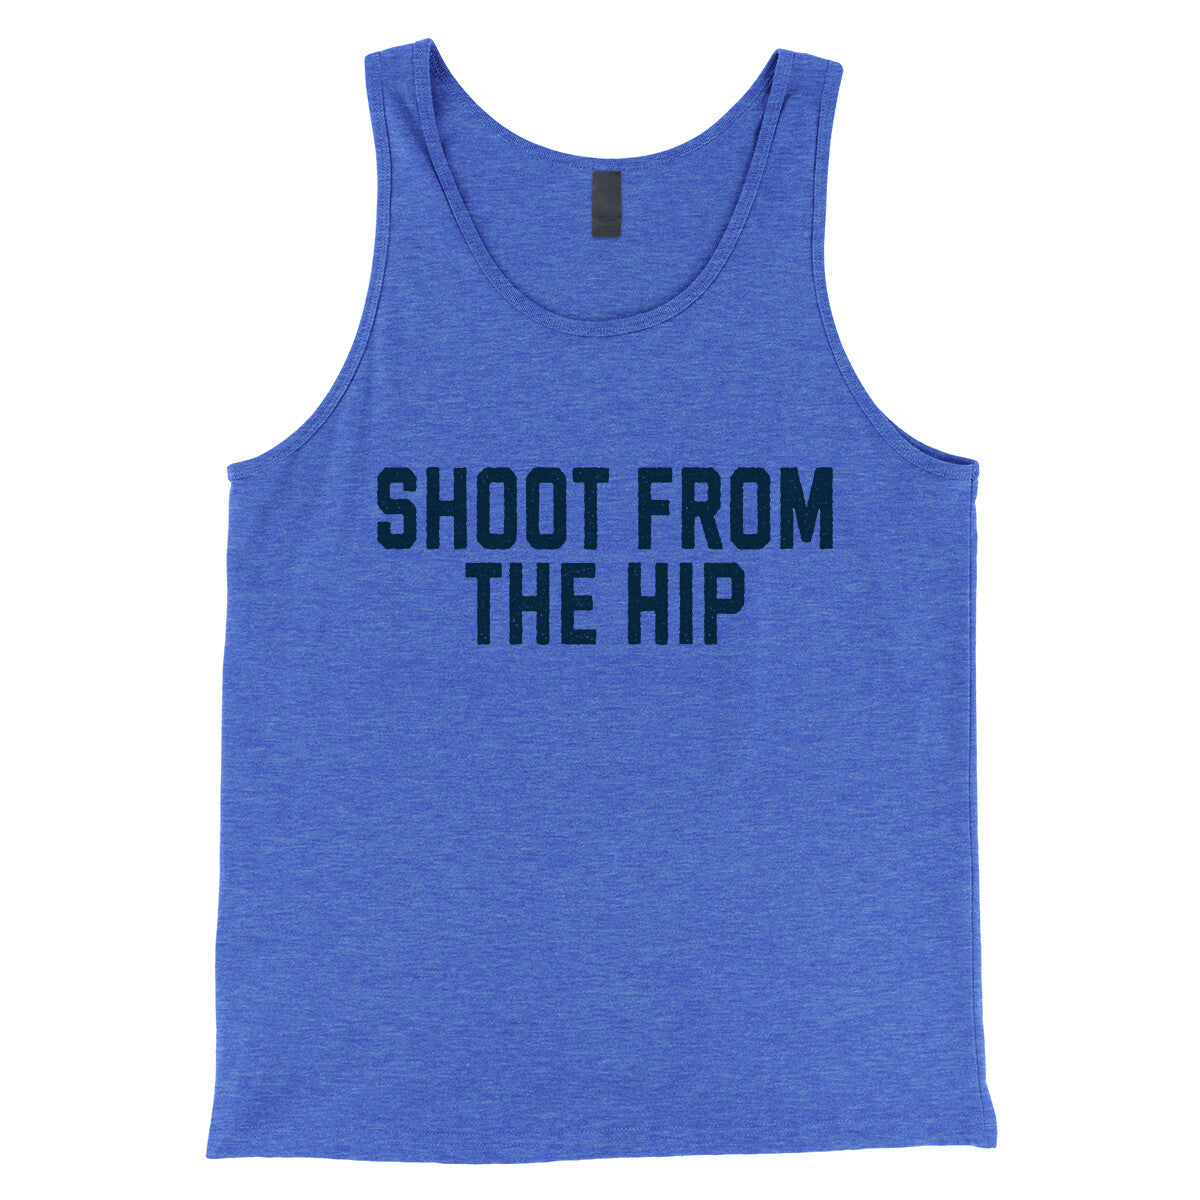 Shoot from the Hip in True Royal TriBlend Color